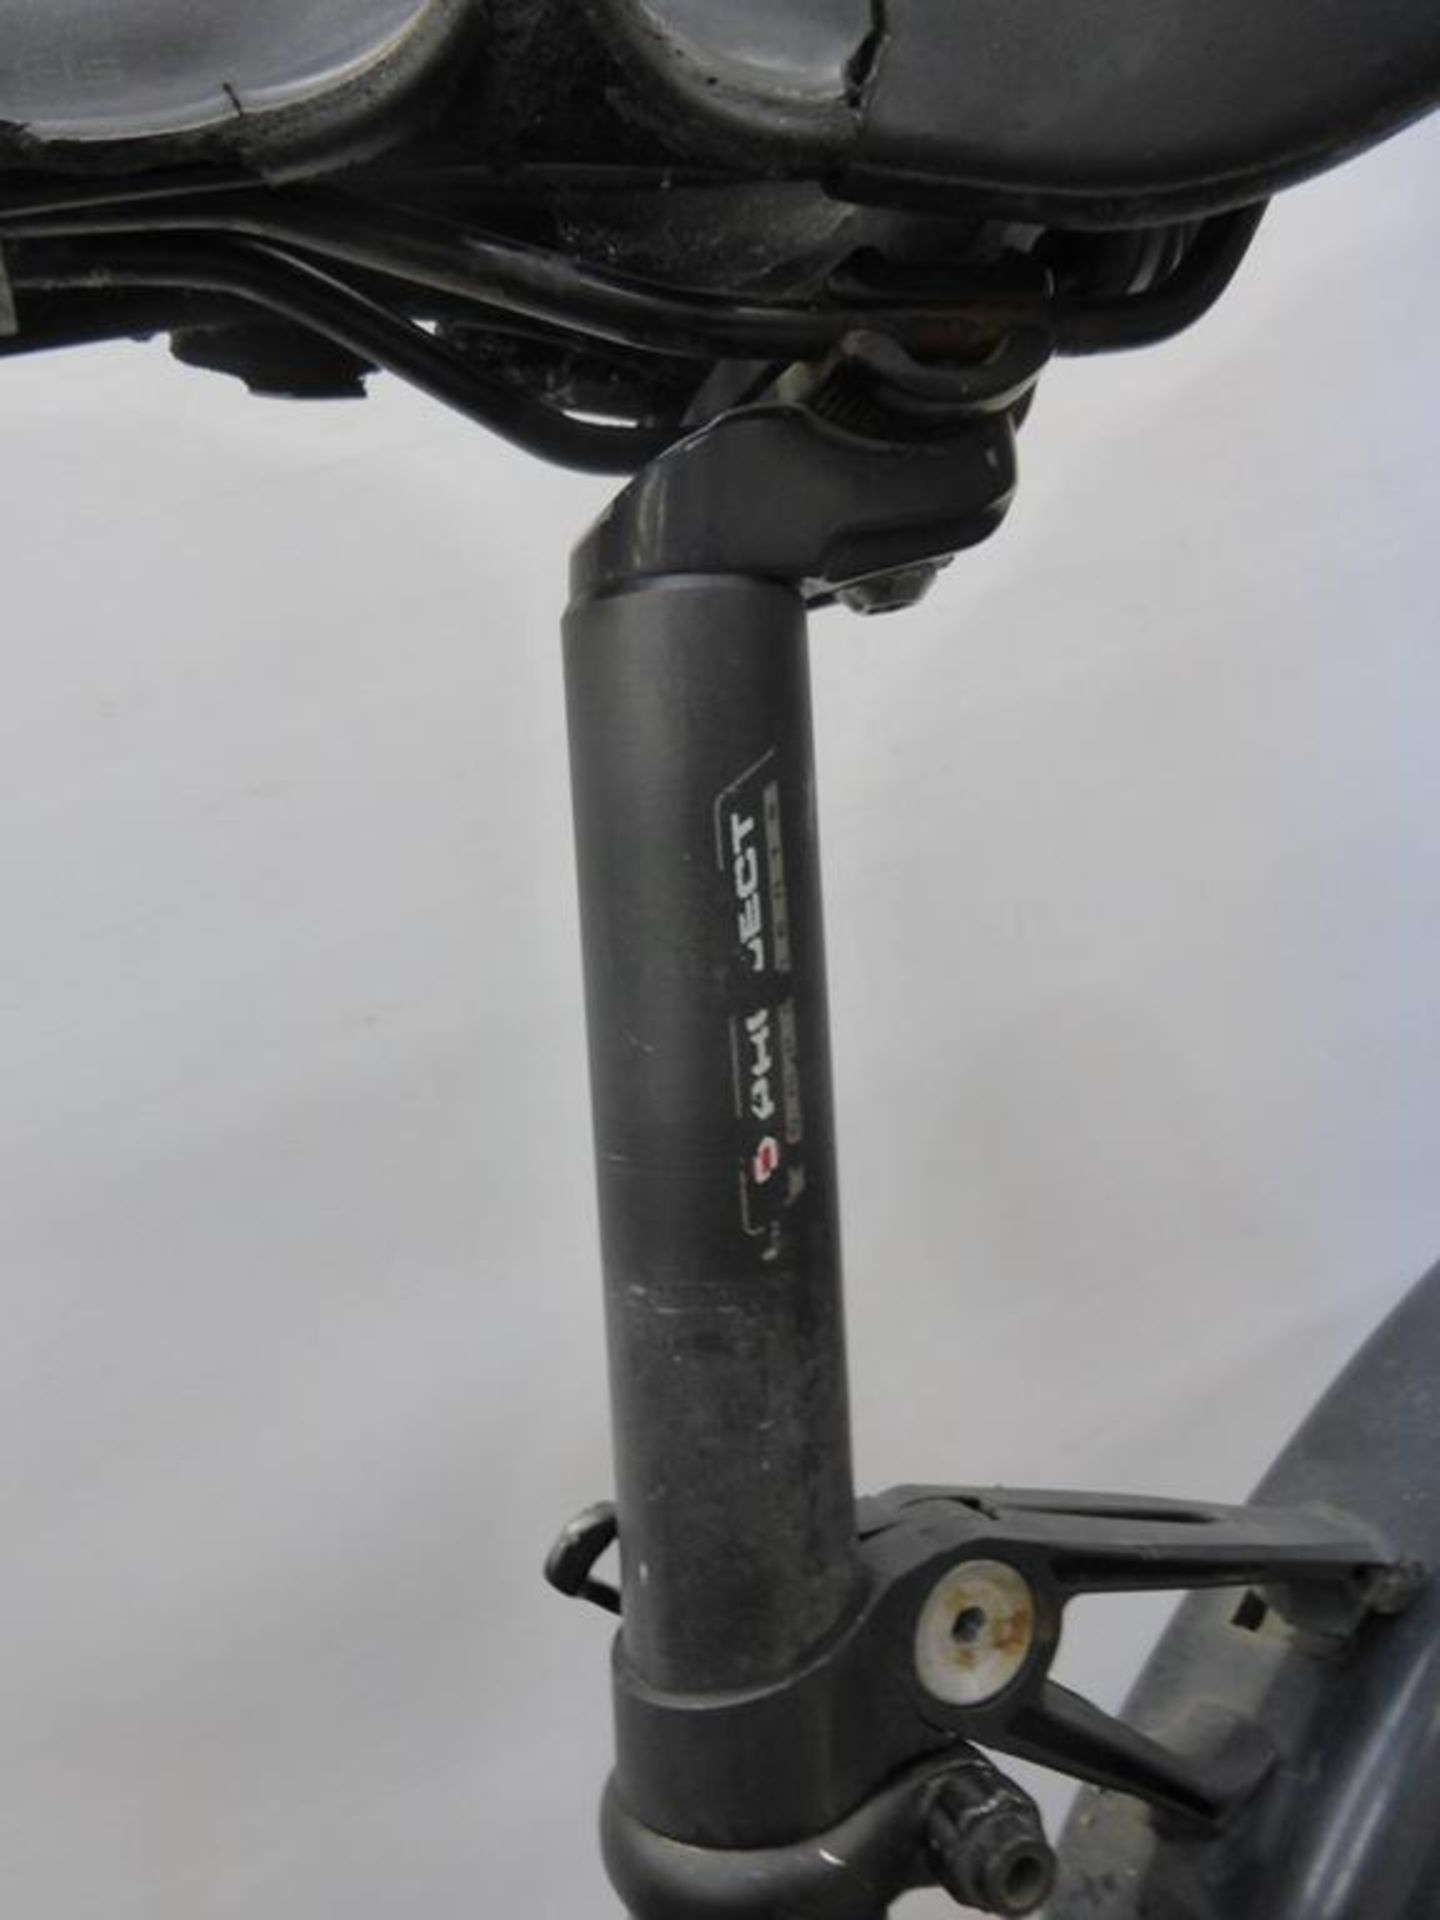 A Used Ideal Hillmaster Mountain Bicycle - Image 18 of 34